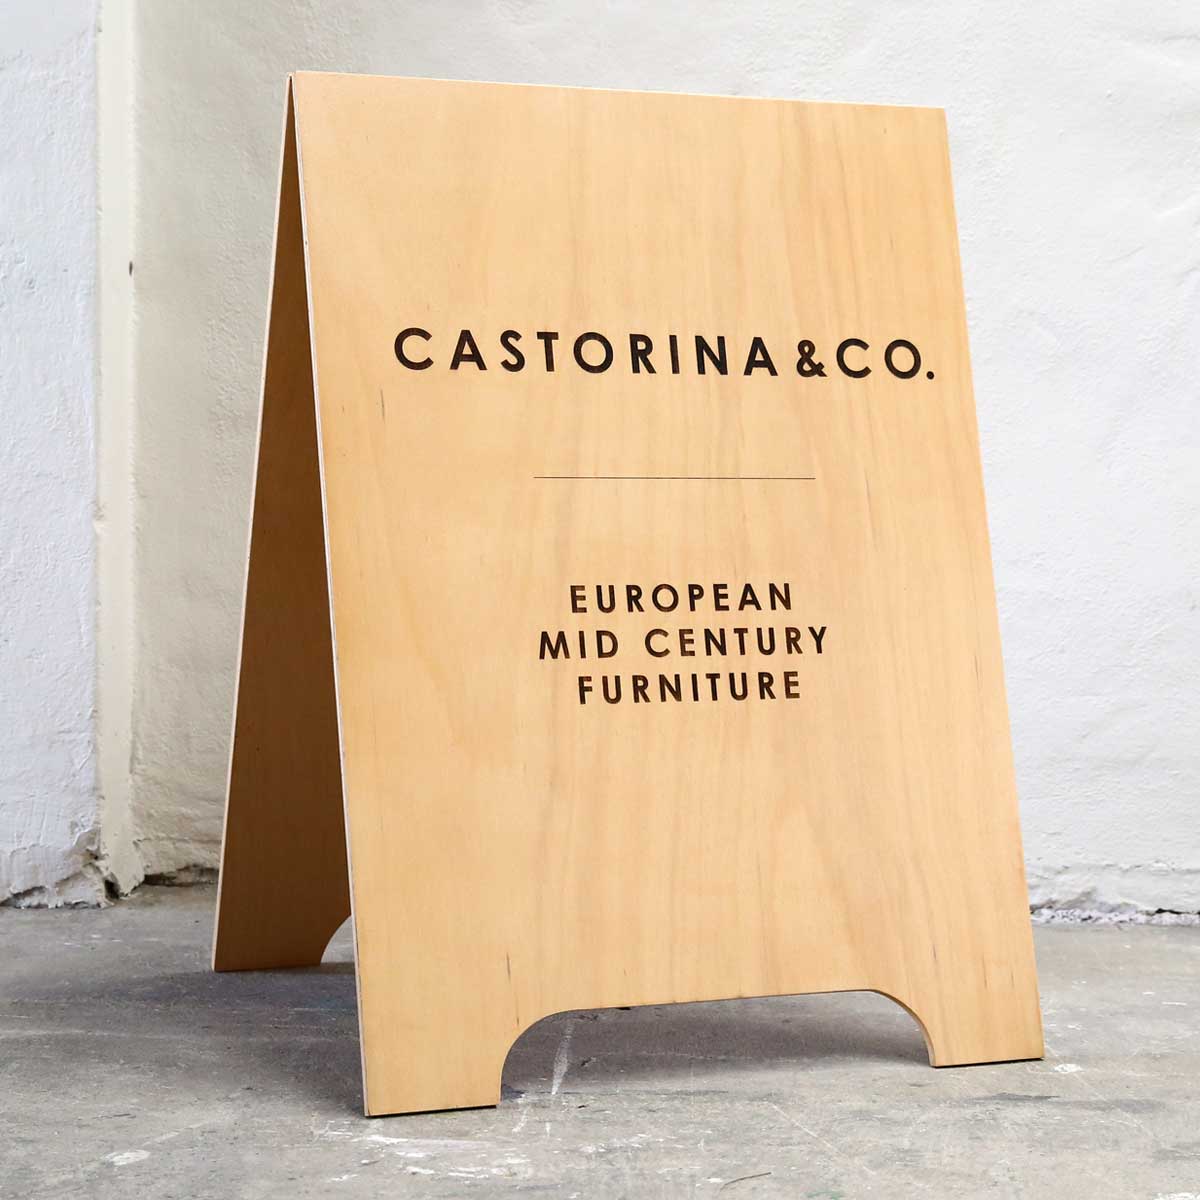 https://thelaserco.com/wp-content/uploads/2020/07/14_Engraved_market_sign_plywood.jpg